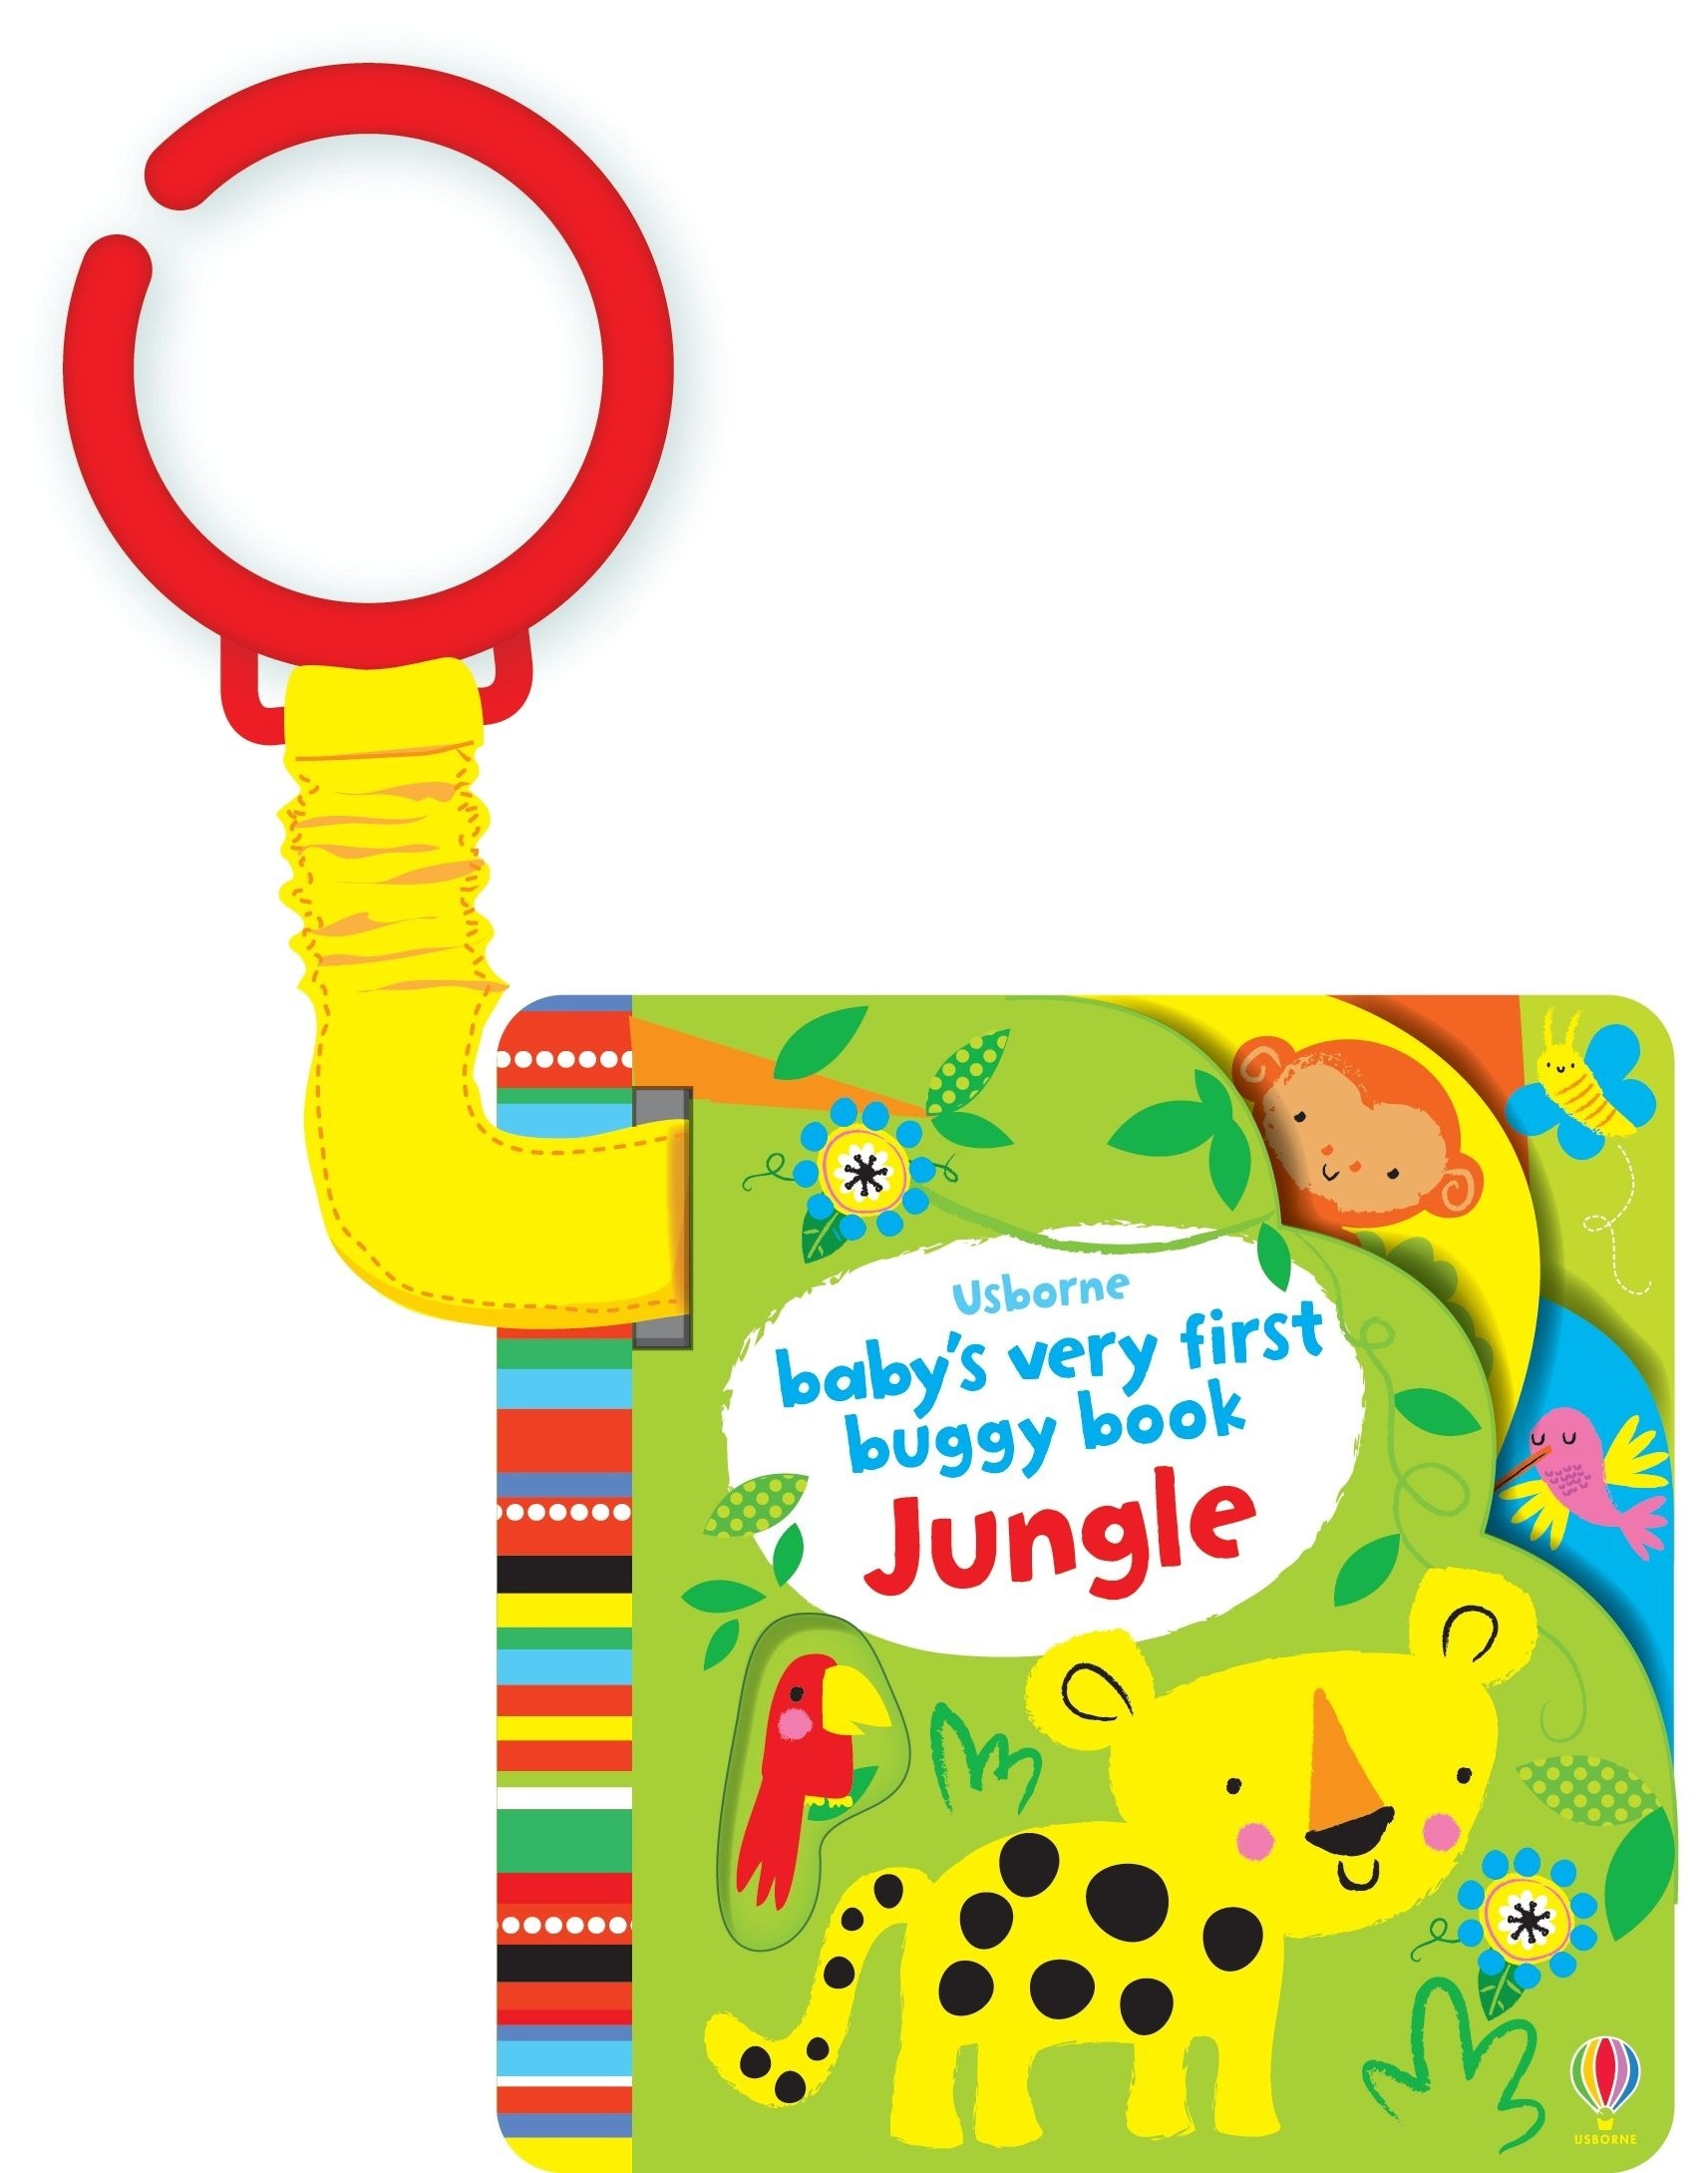 Buggy Book Jungle